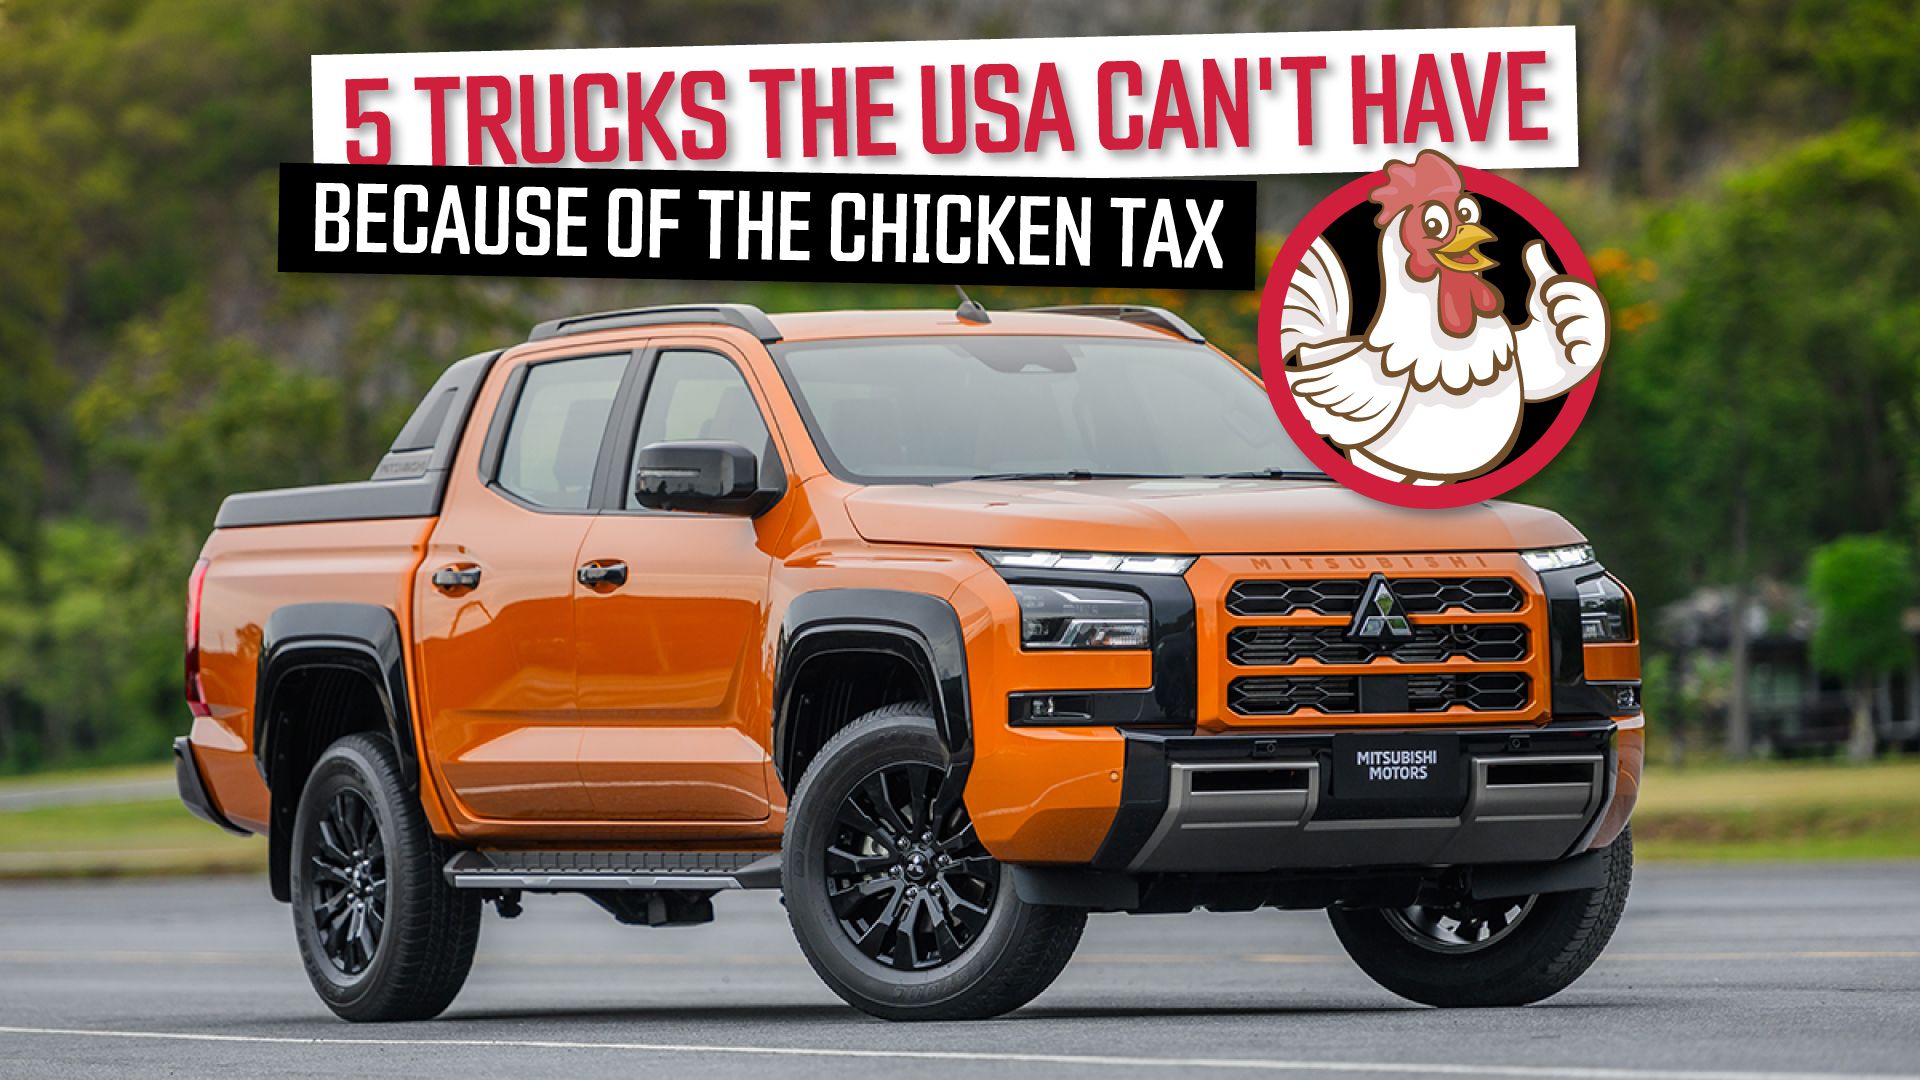 5-Trucks-The-USA-Can't-Have-Because-Of-The-Chicken-Tax